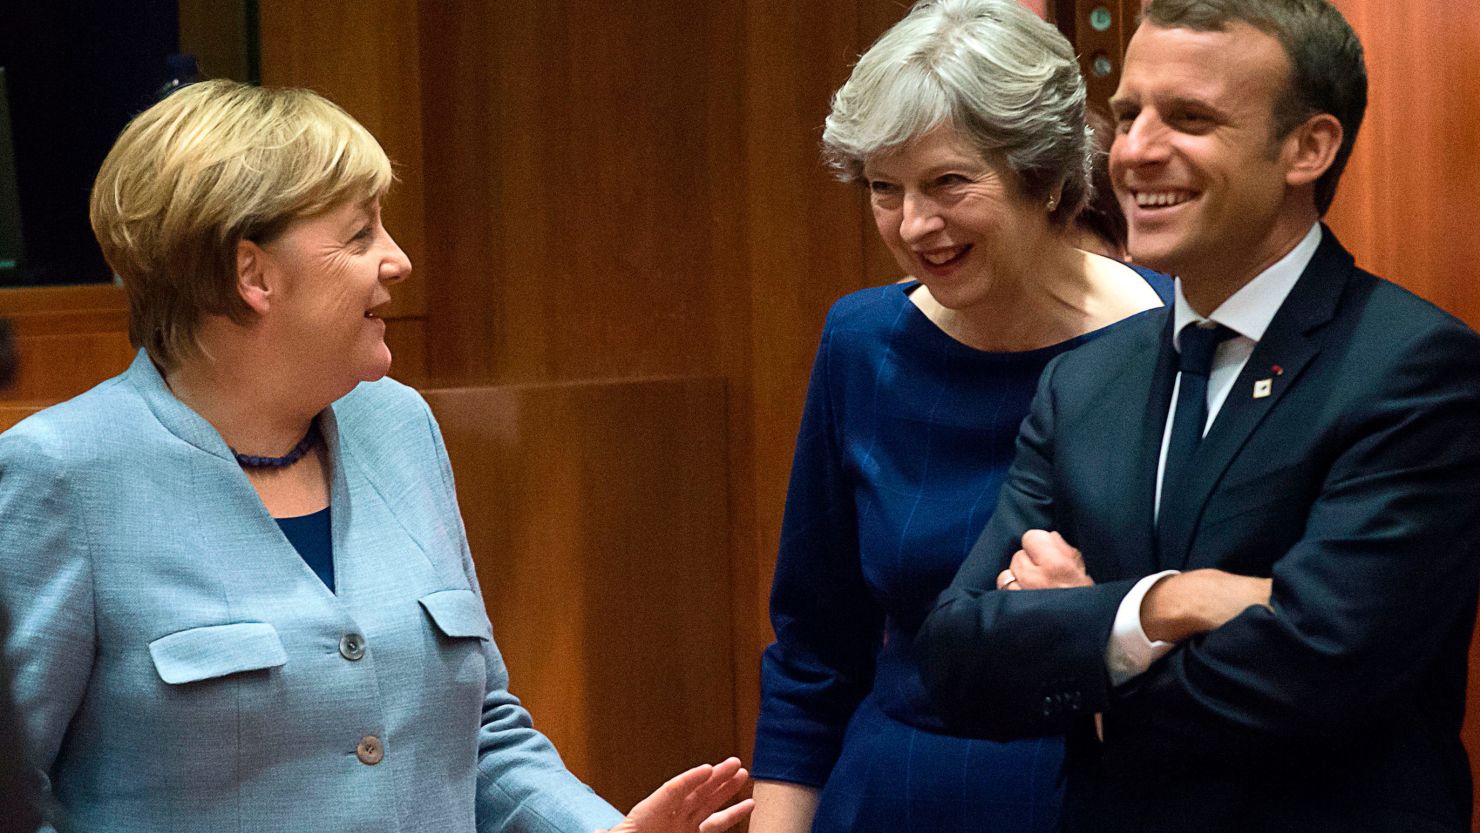 German Chancellor Angela Merkel, Britain Prime minister Theresa May and French President Emmanuel Macron talk as they arrive in Brussels.